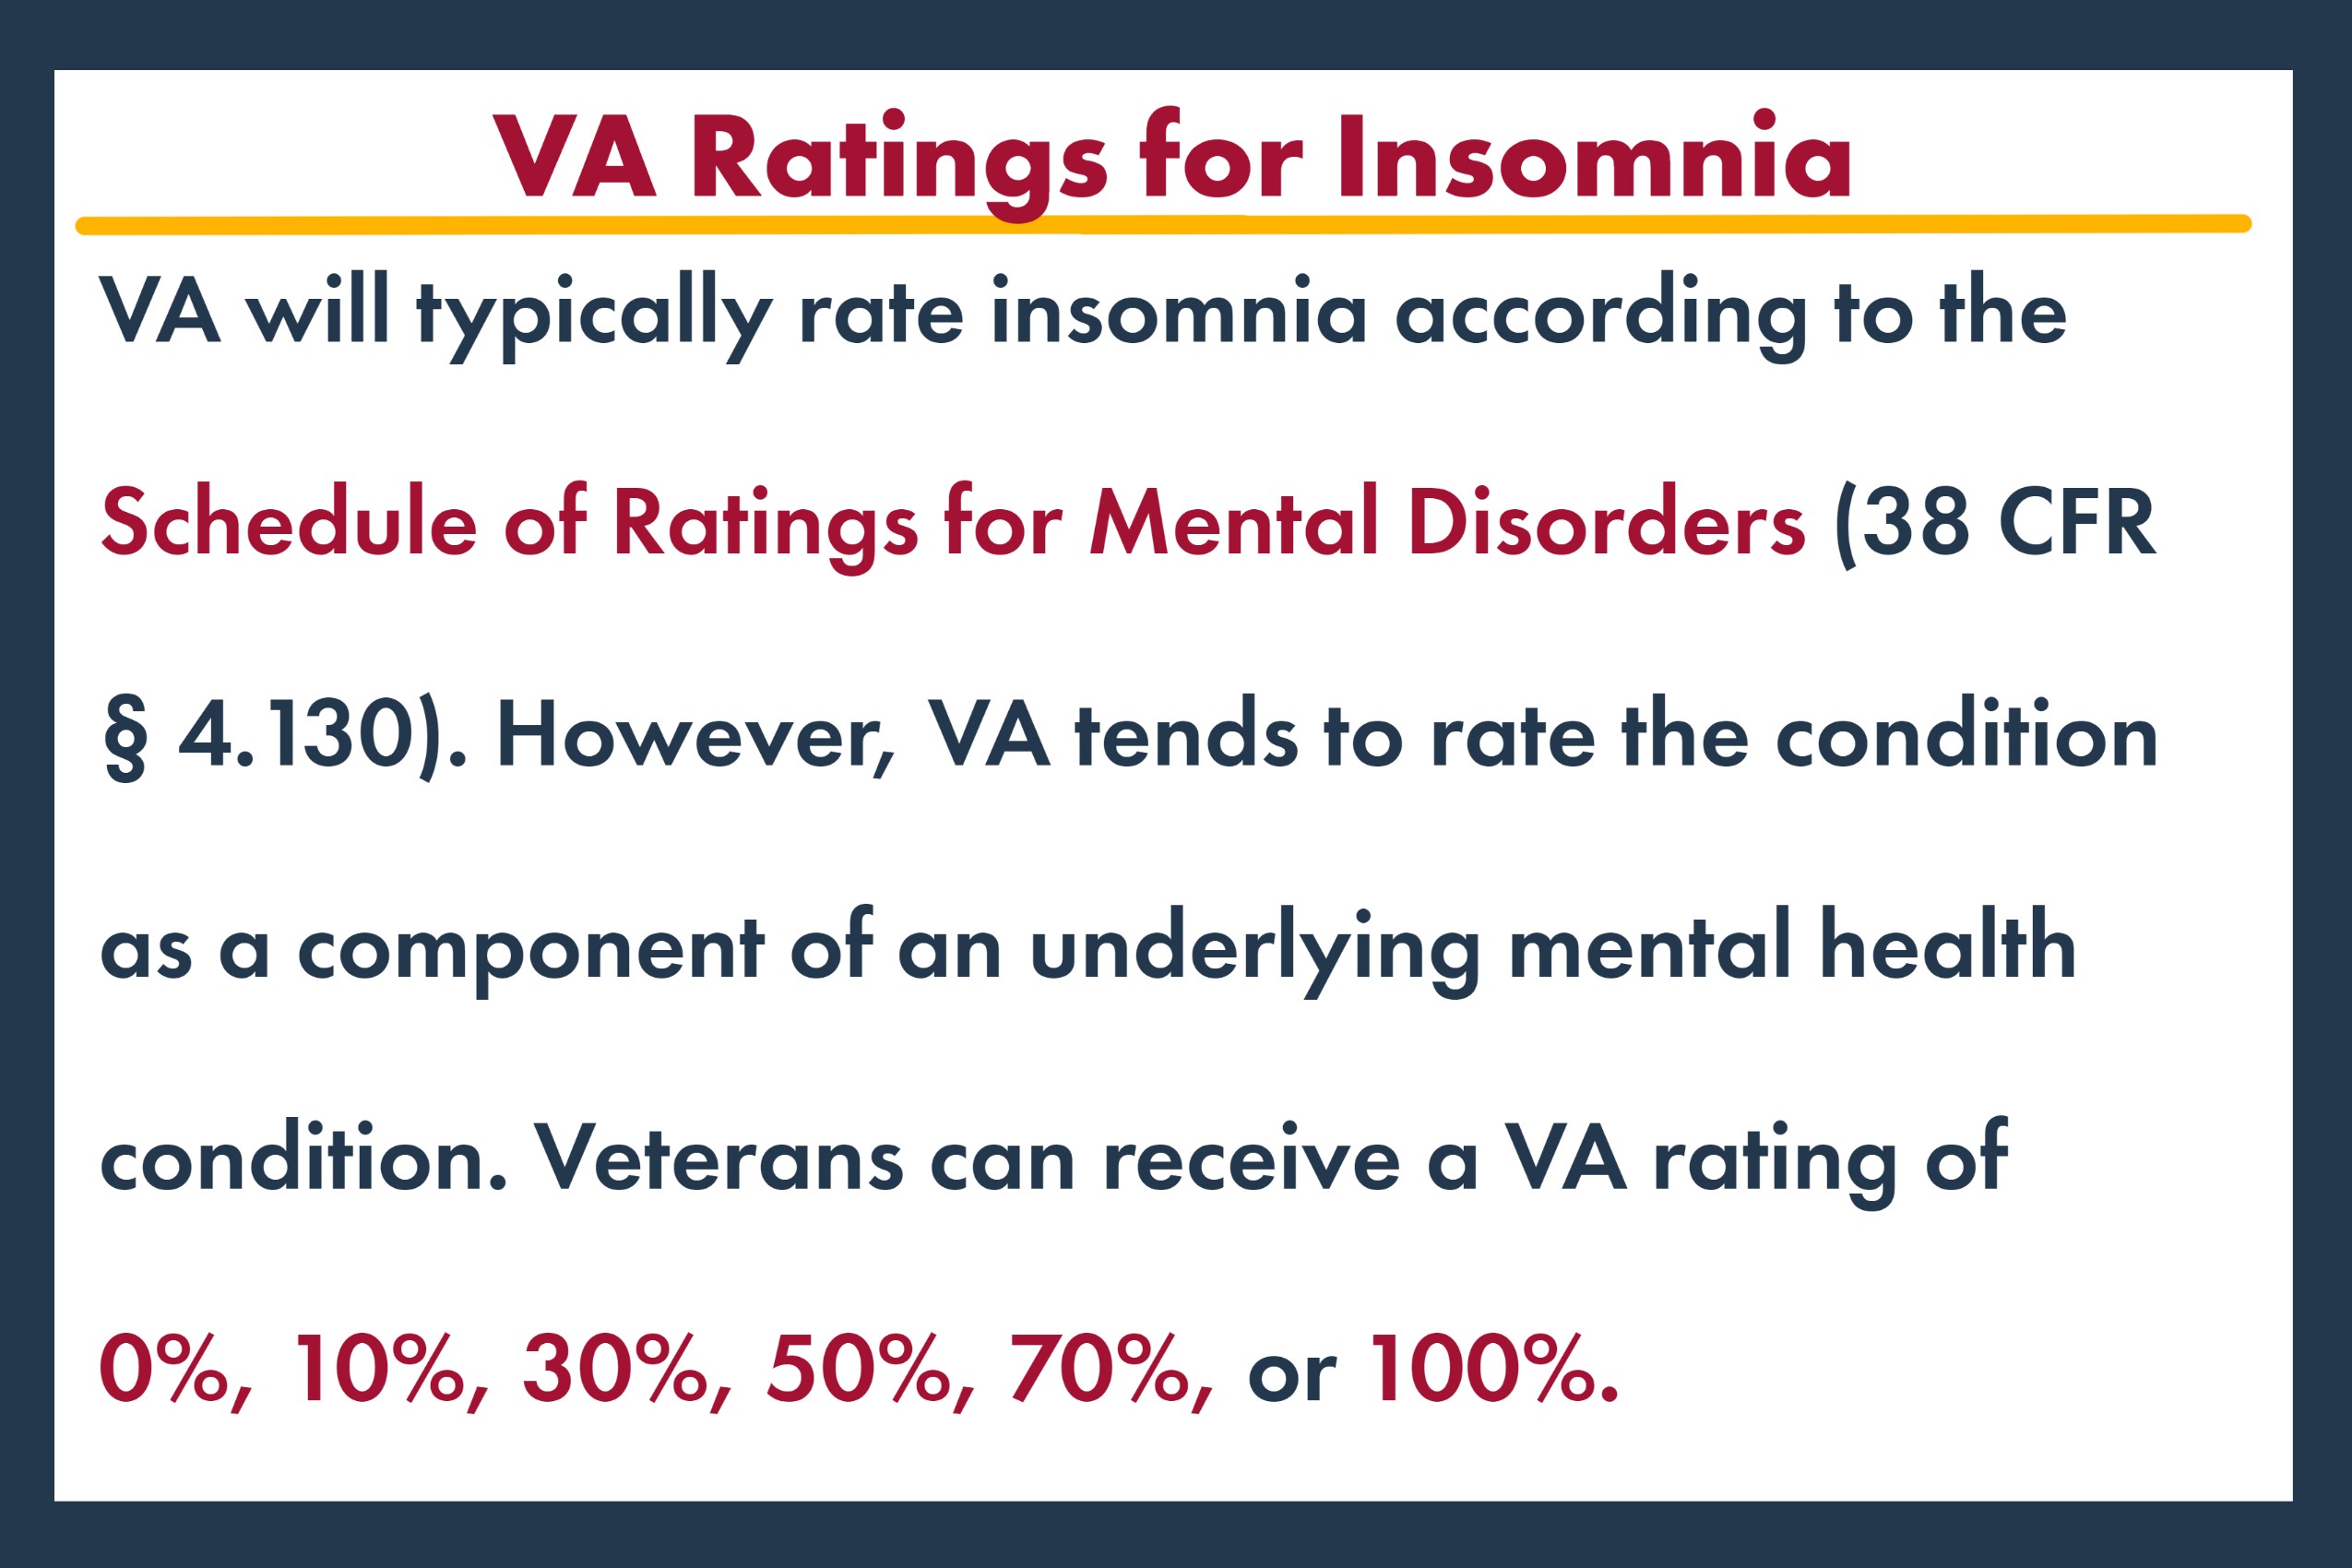 va ratings for insomnia VA will typically rate insomnia according to the Schedule of Ratings for Mental Disorders (38 CFR § 4.130).  However, VA tends to rate the condition as a component of an underlying mental health condition.  Veterans can receive a VA rating of 0%, 10%, 30%, 50%, 70%, or 100%.